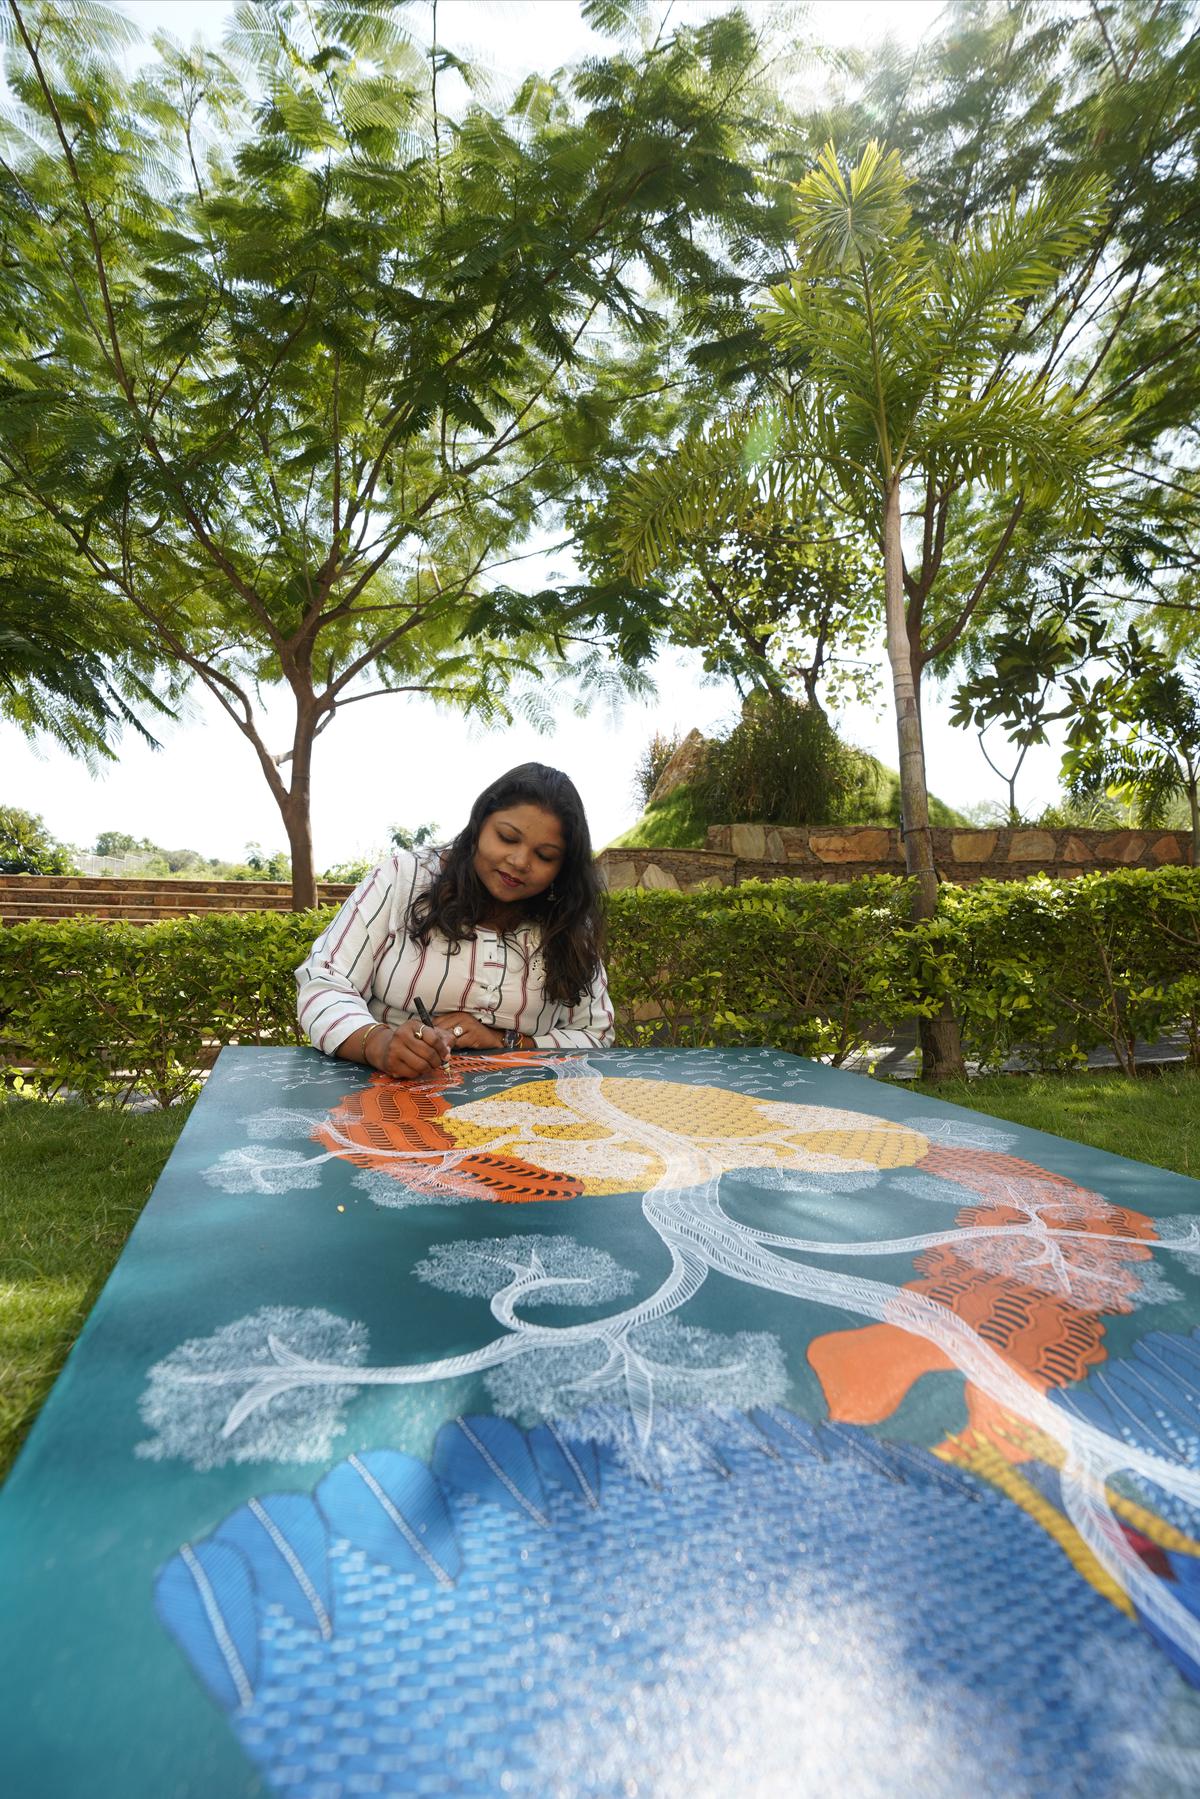 30 years of India-ASEAN ties celebrated by means of an artwork camp in Udaipur. Meet the artists